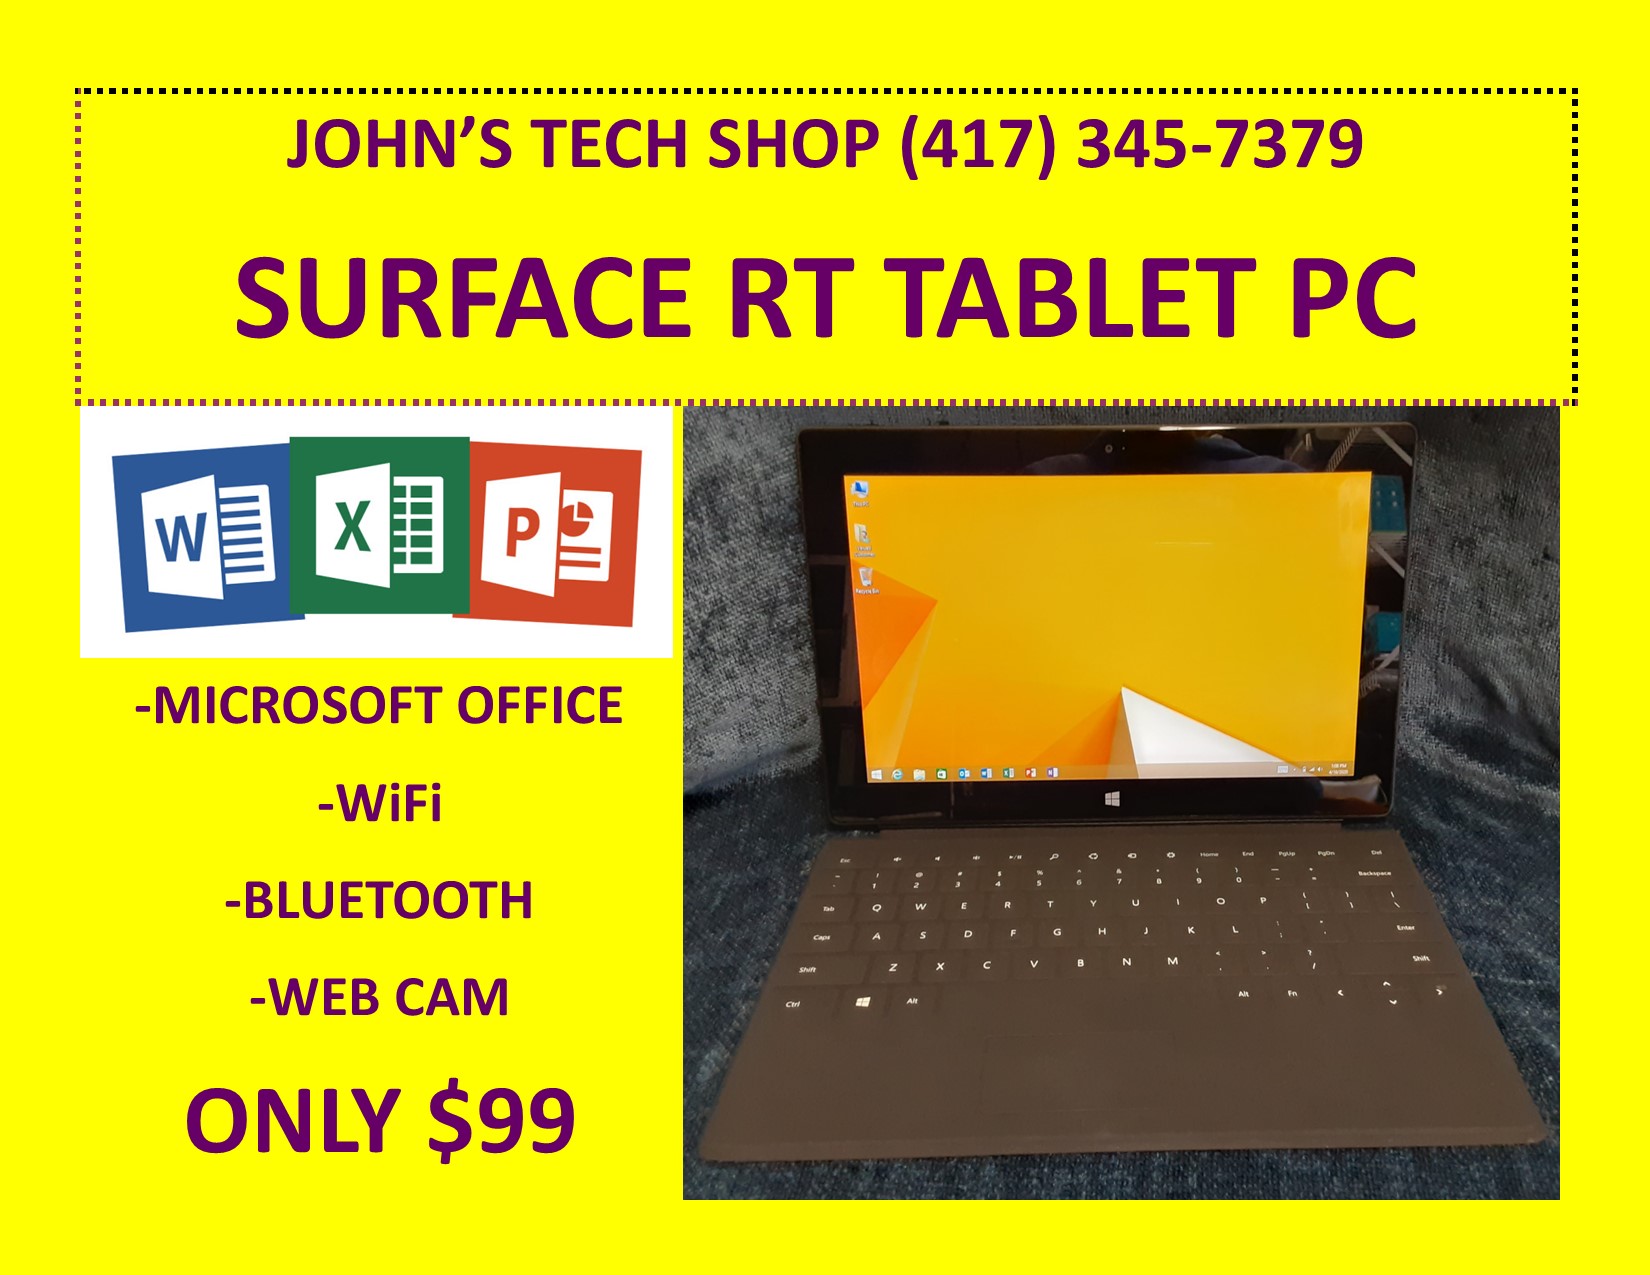 SURFACE RT